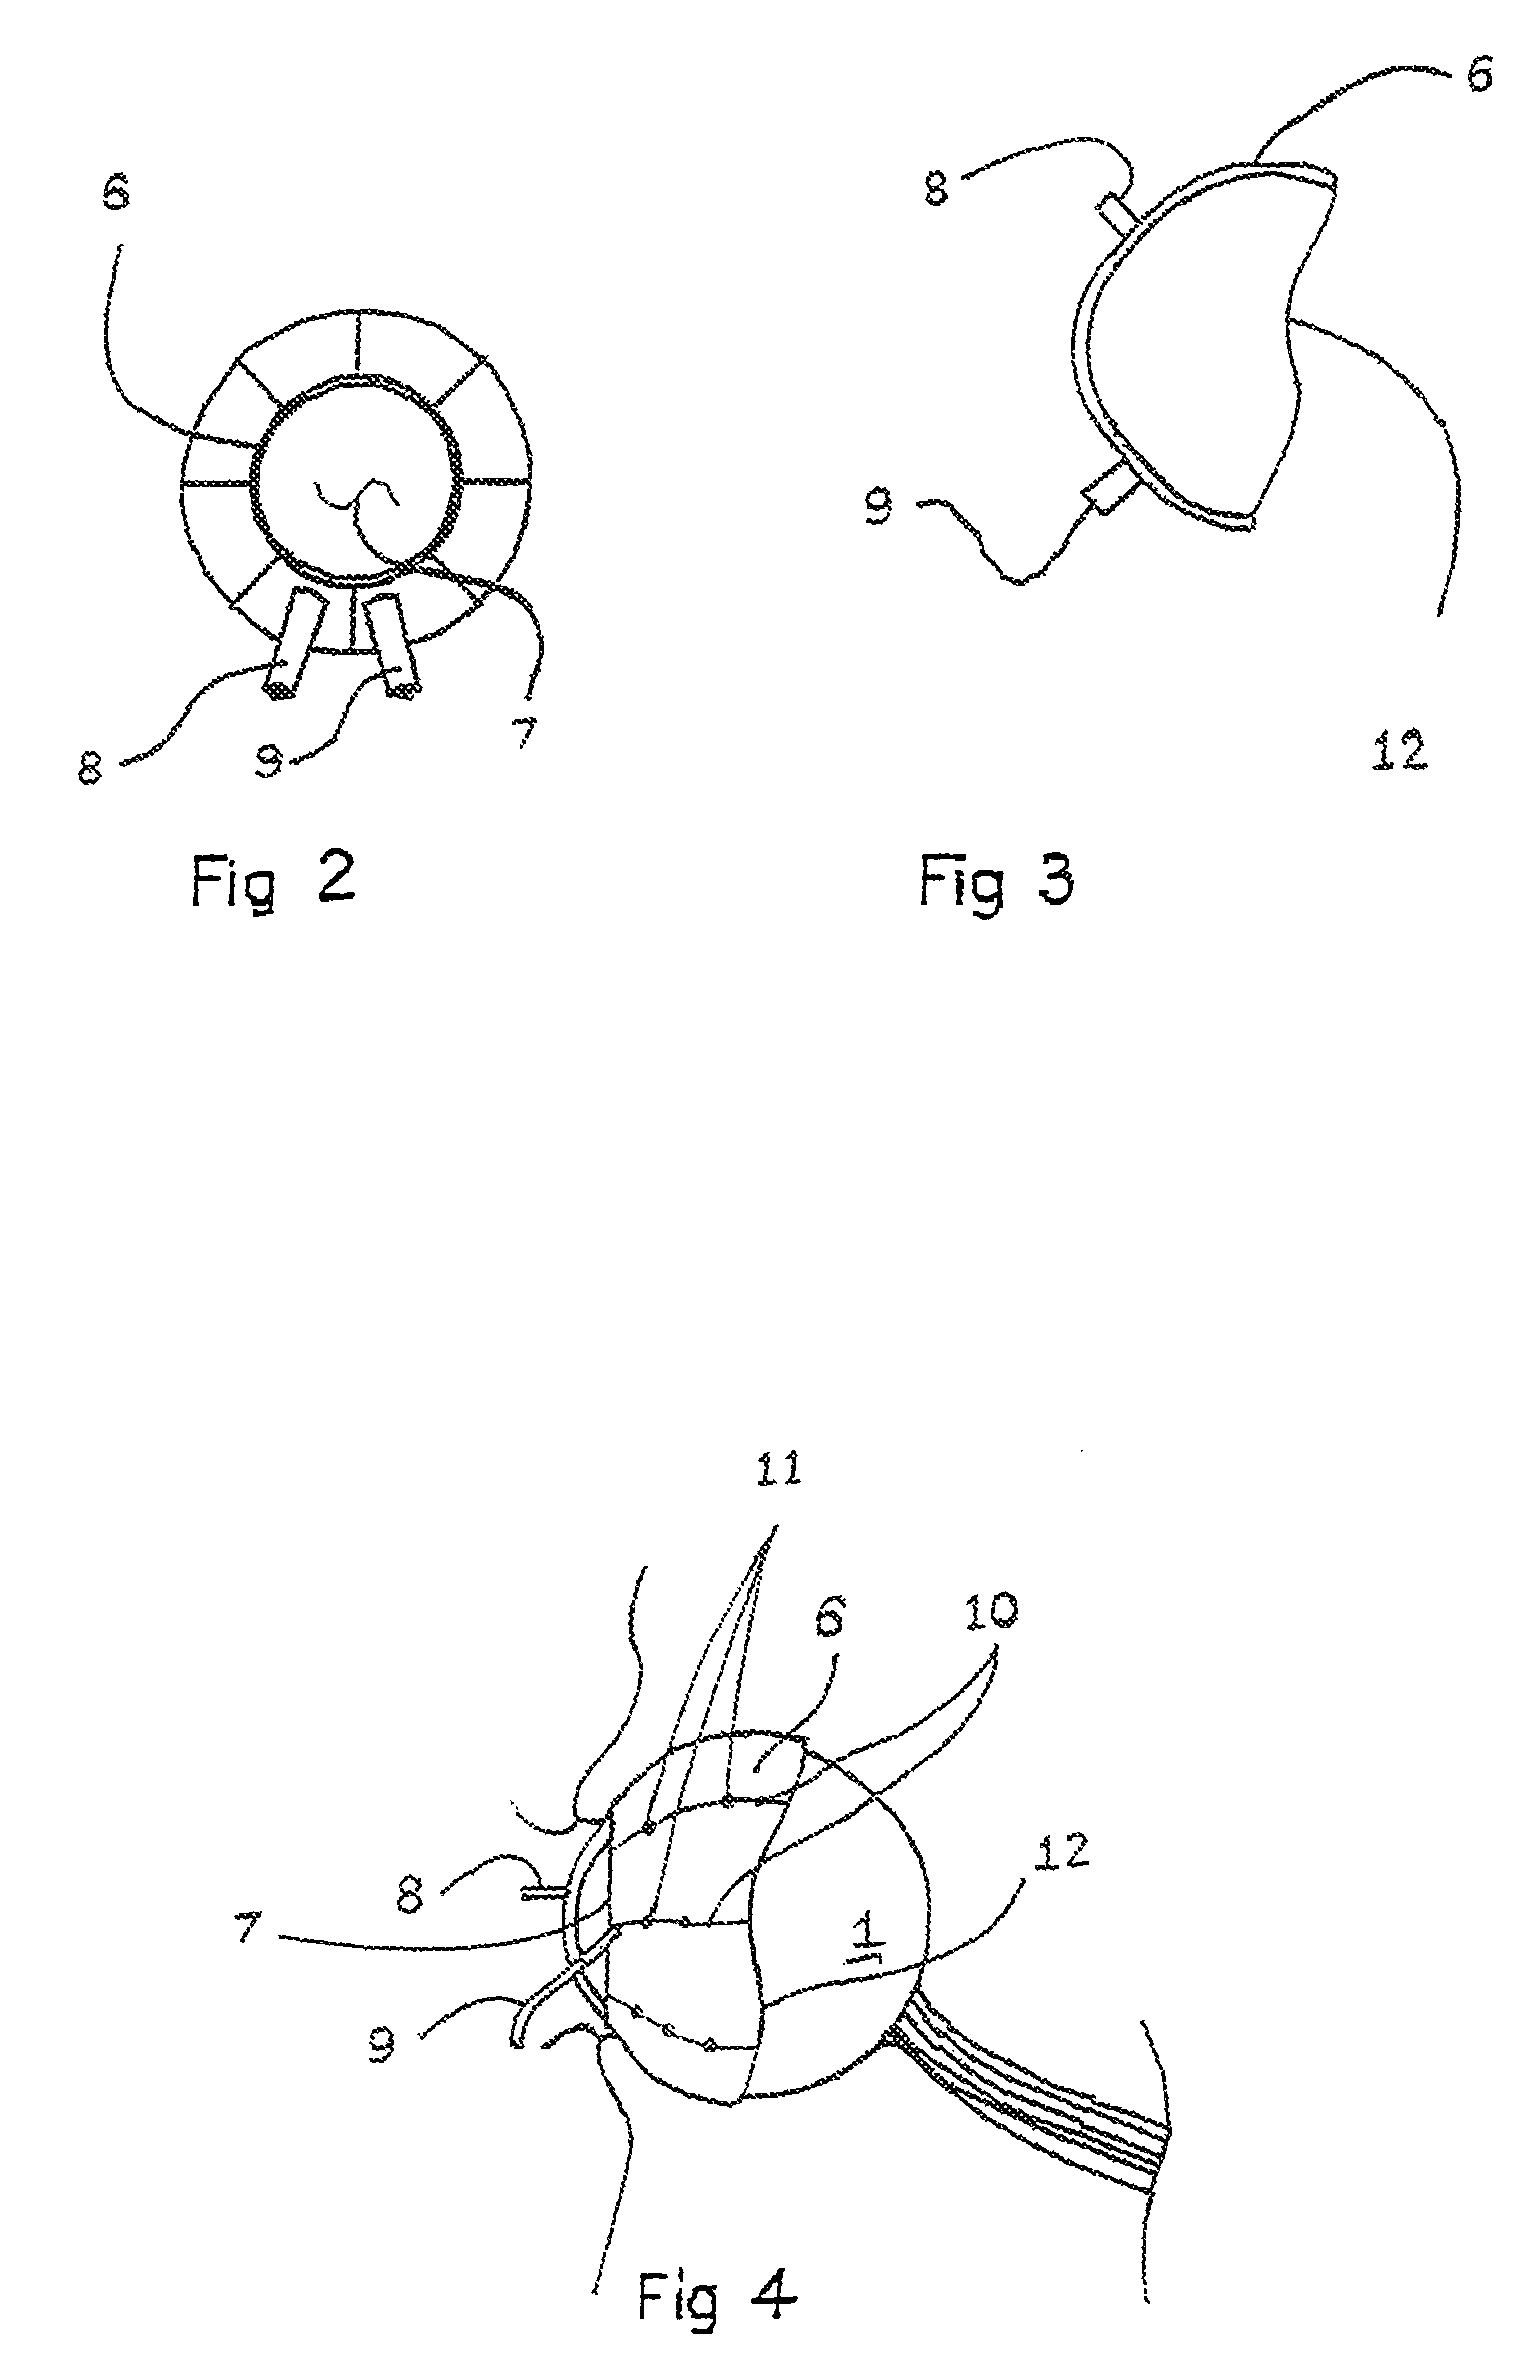 Medical device and method for temperature control and treatment of the eye and surrounding tissues via magnetic drug therapy